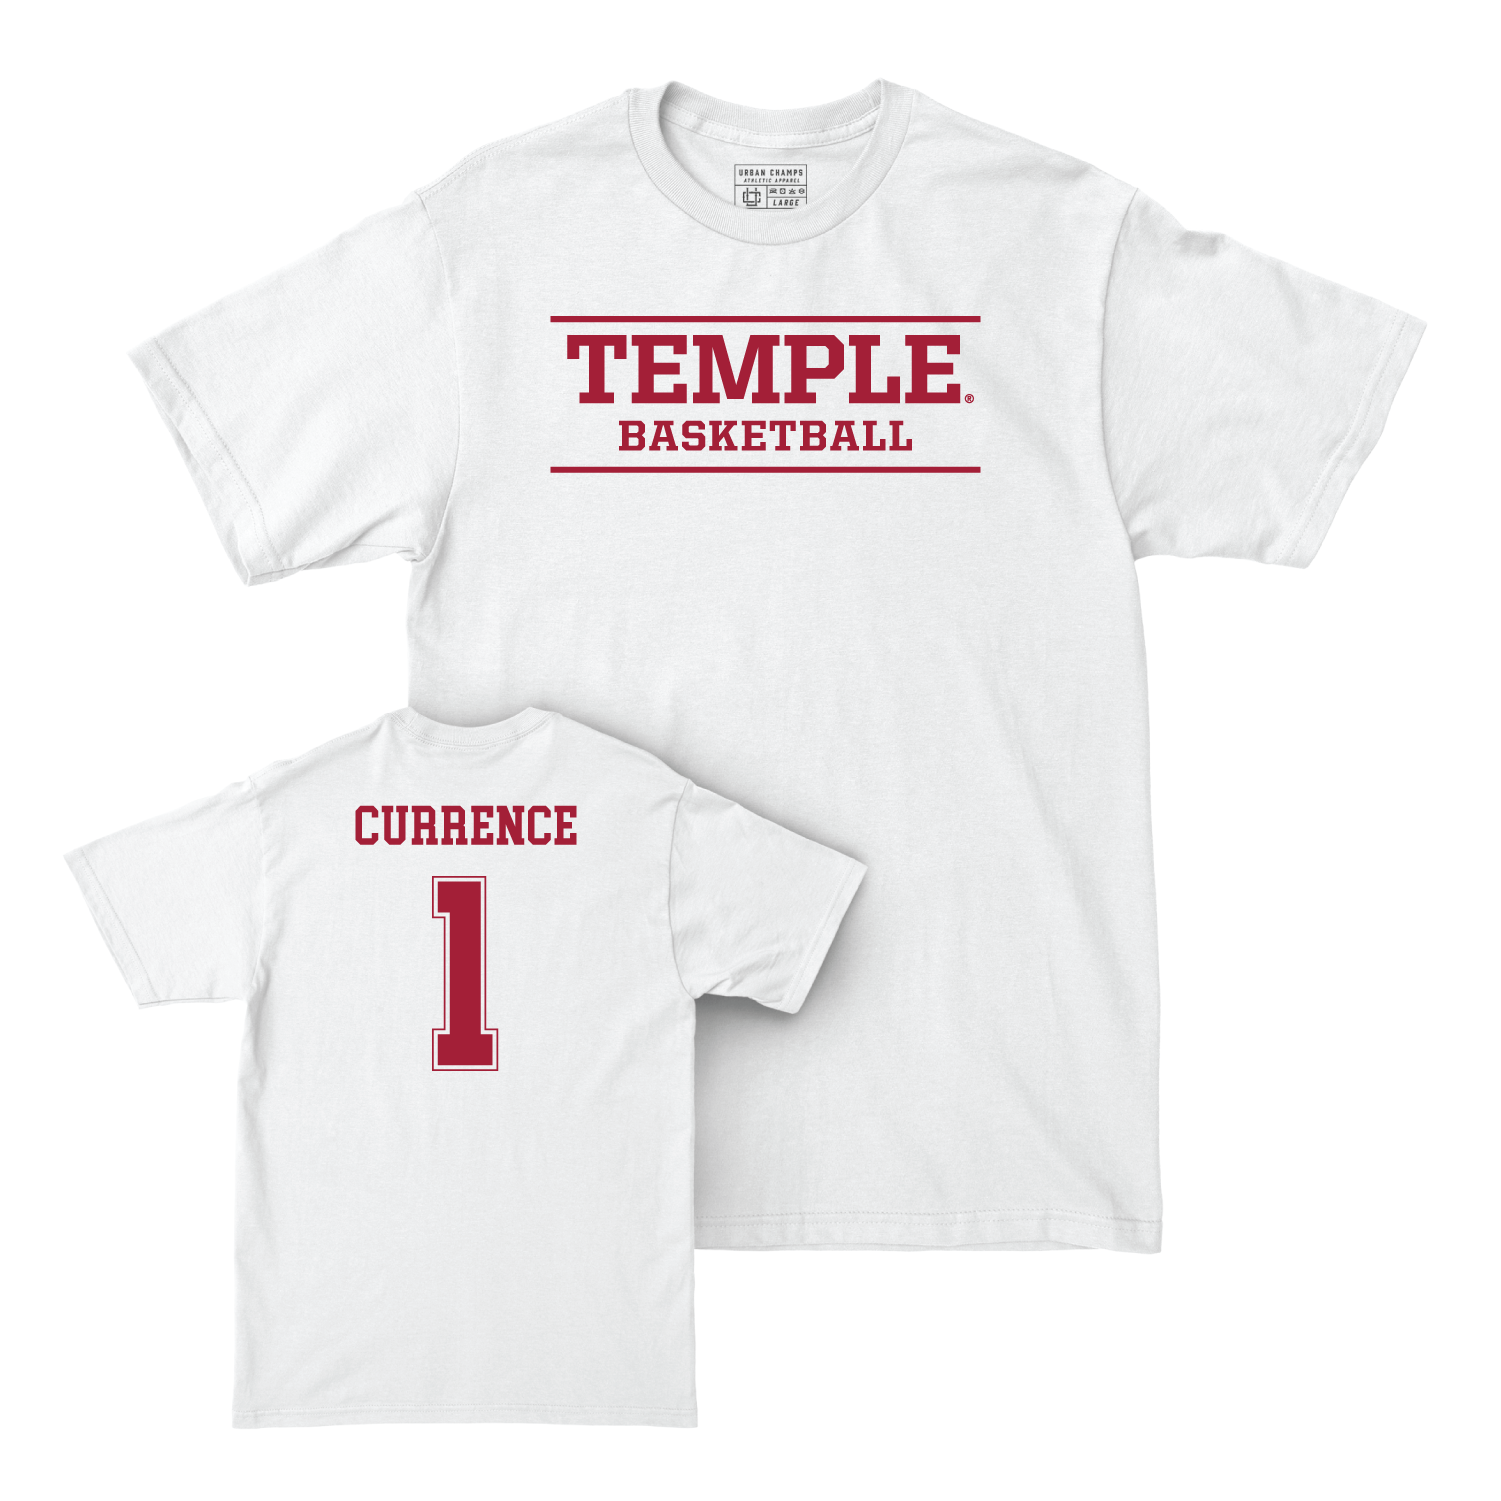 Women's Basketball White Classic Comfort Colors Tee - Kendall Currence Youth Small